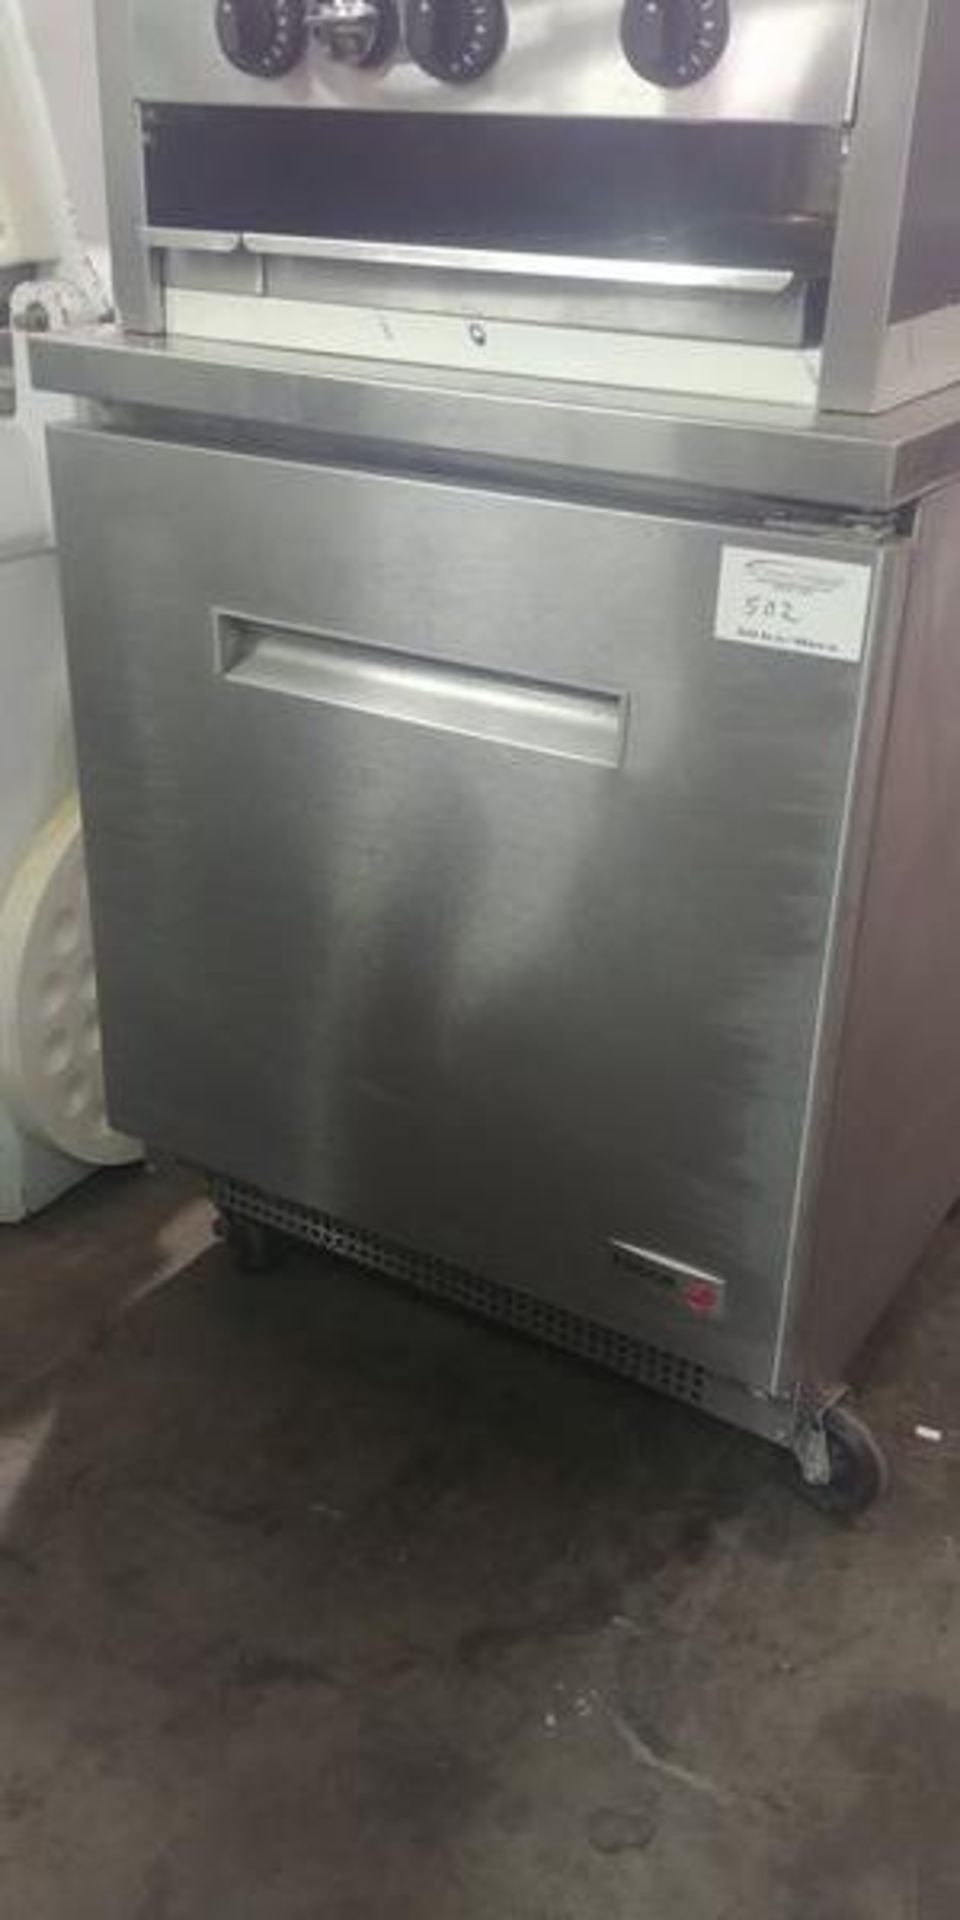 Fagor 27" Undercounter Cooler - Used 3 Months